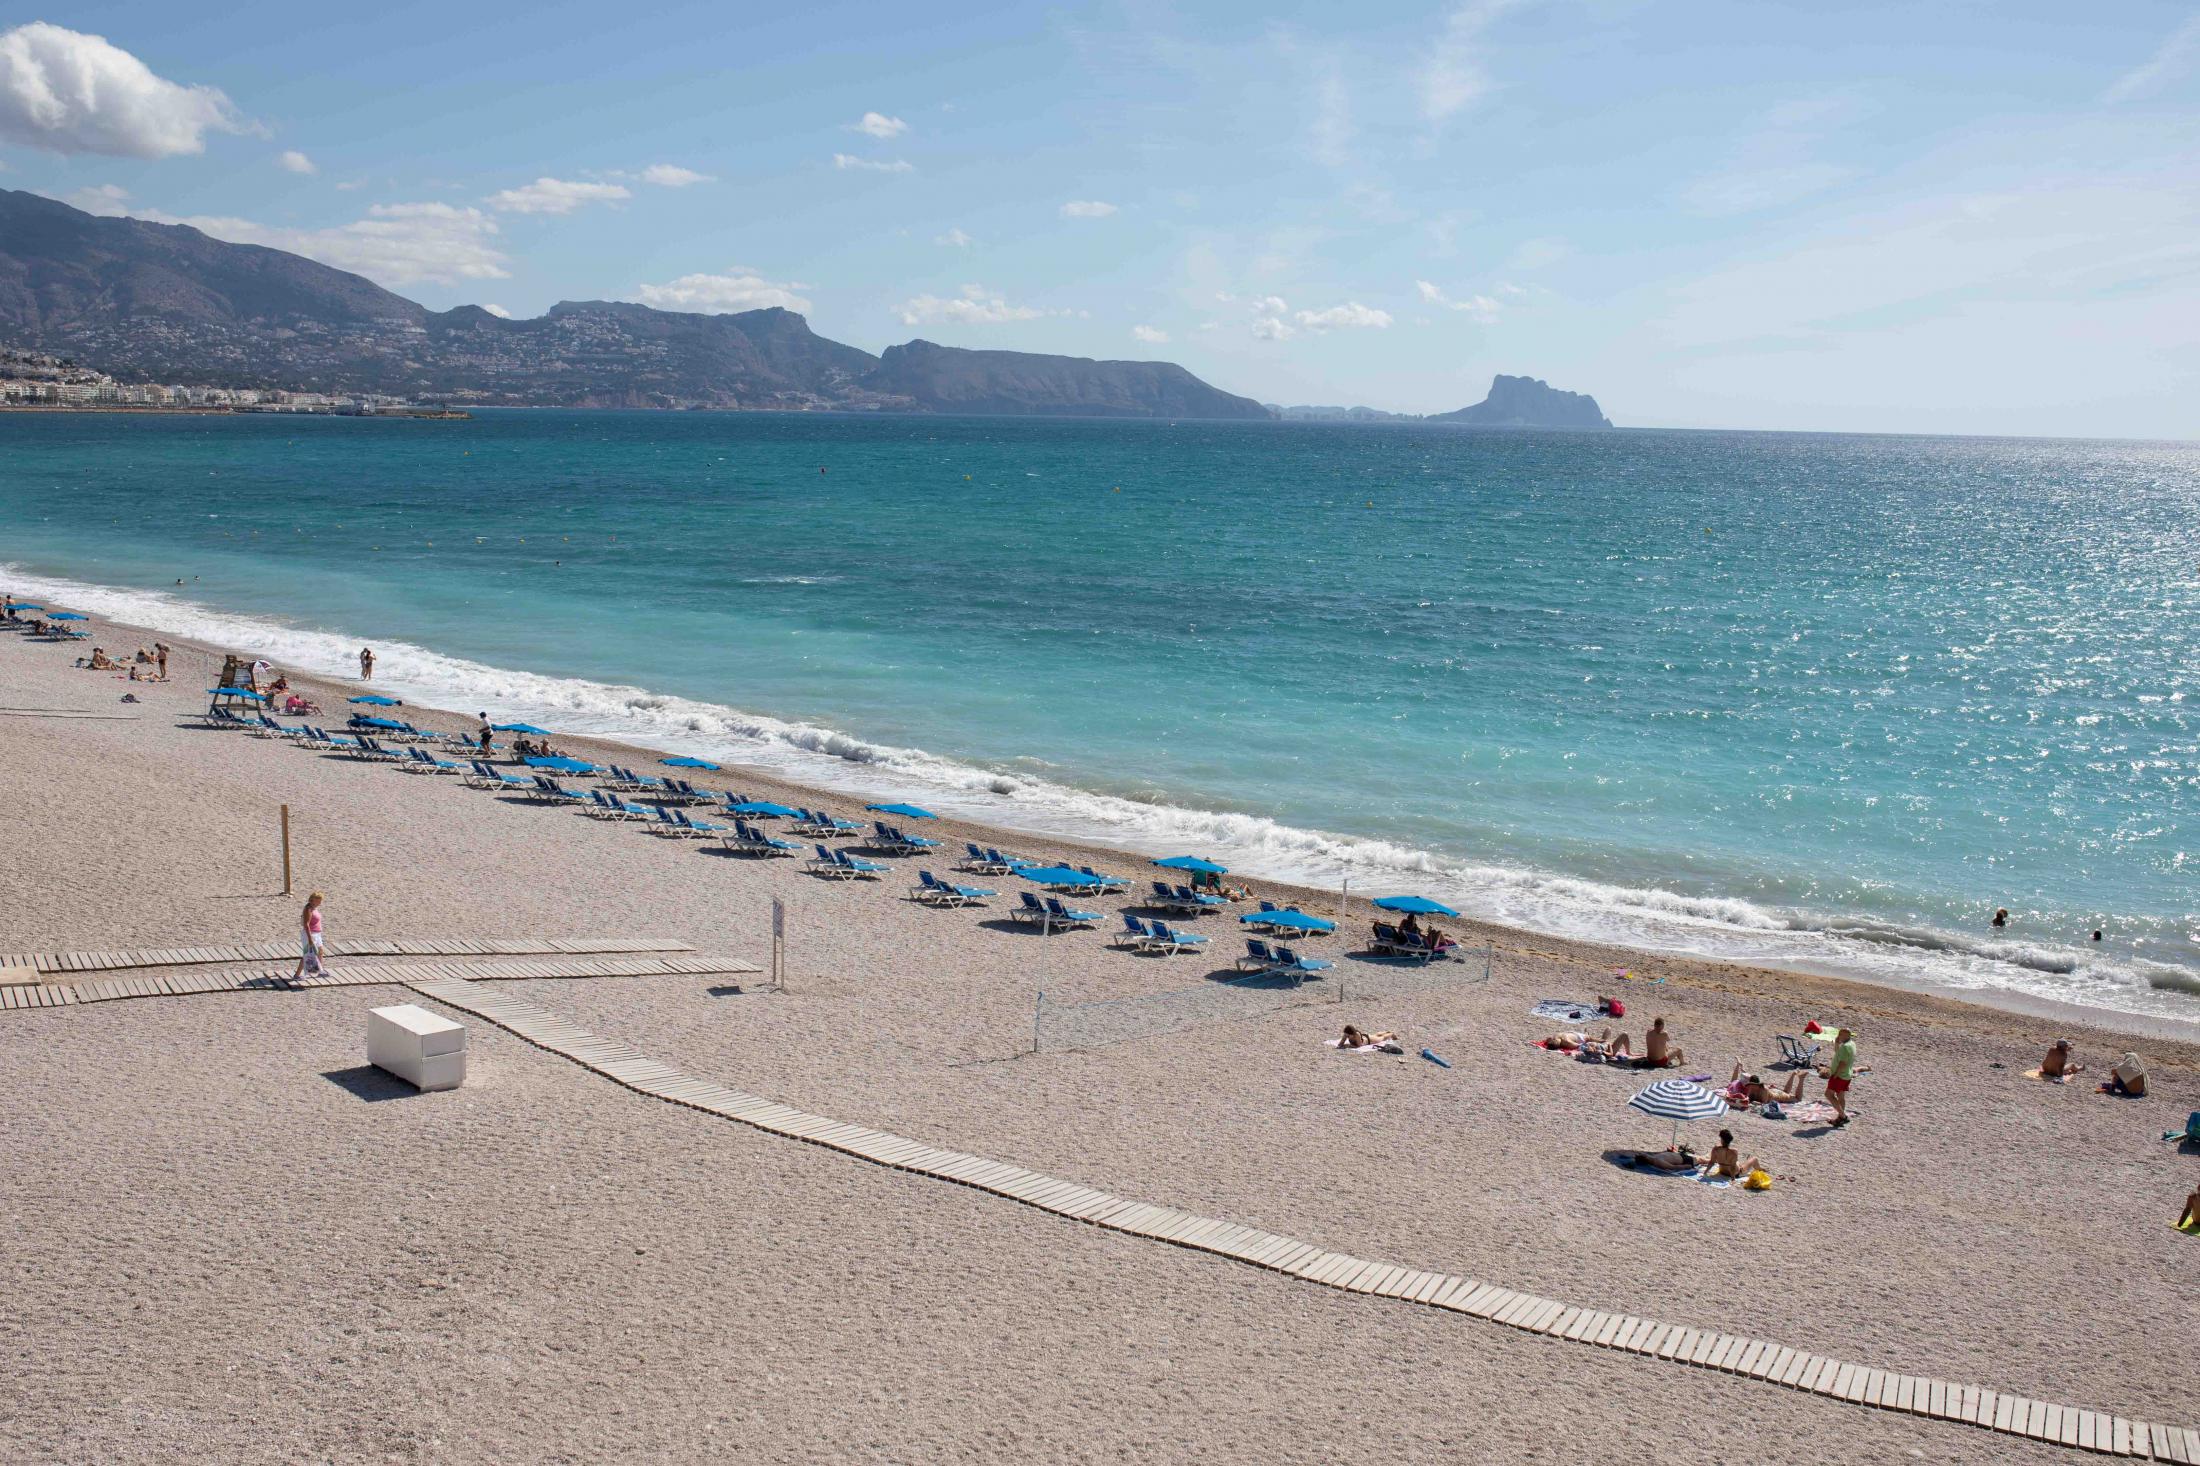  [ENG] Those who are looking to get away from the hustle and bustle, and the typical fine sand beaches, love Playa del Albir, because it is the...